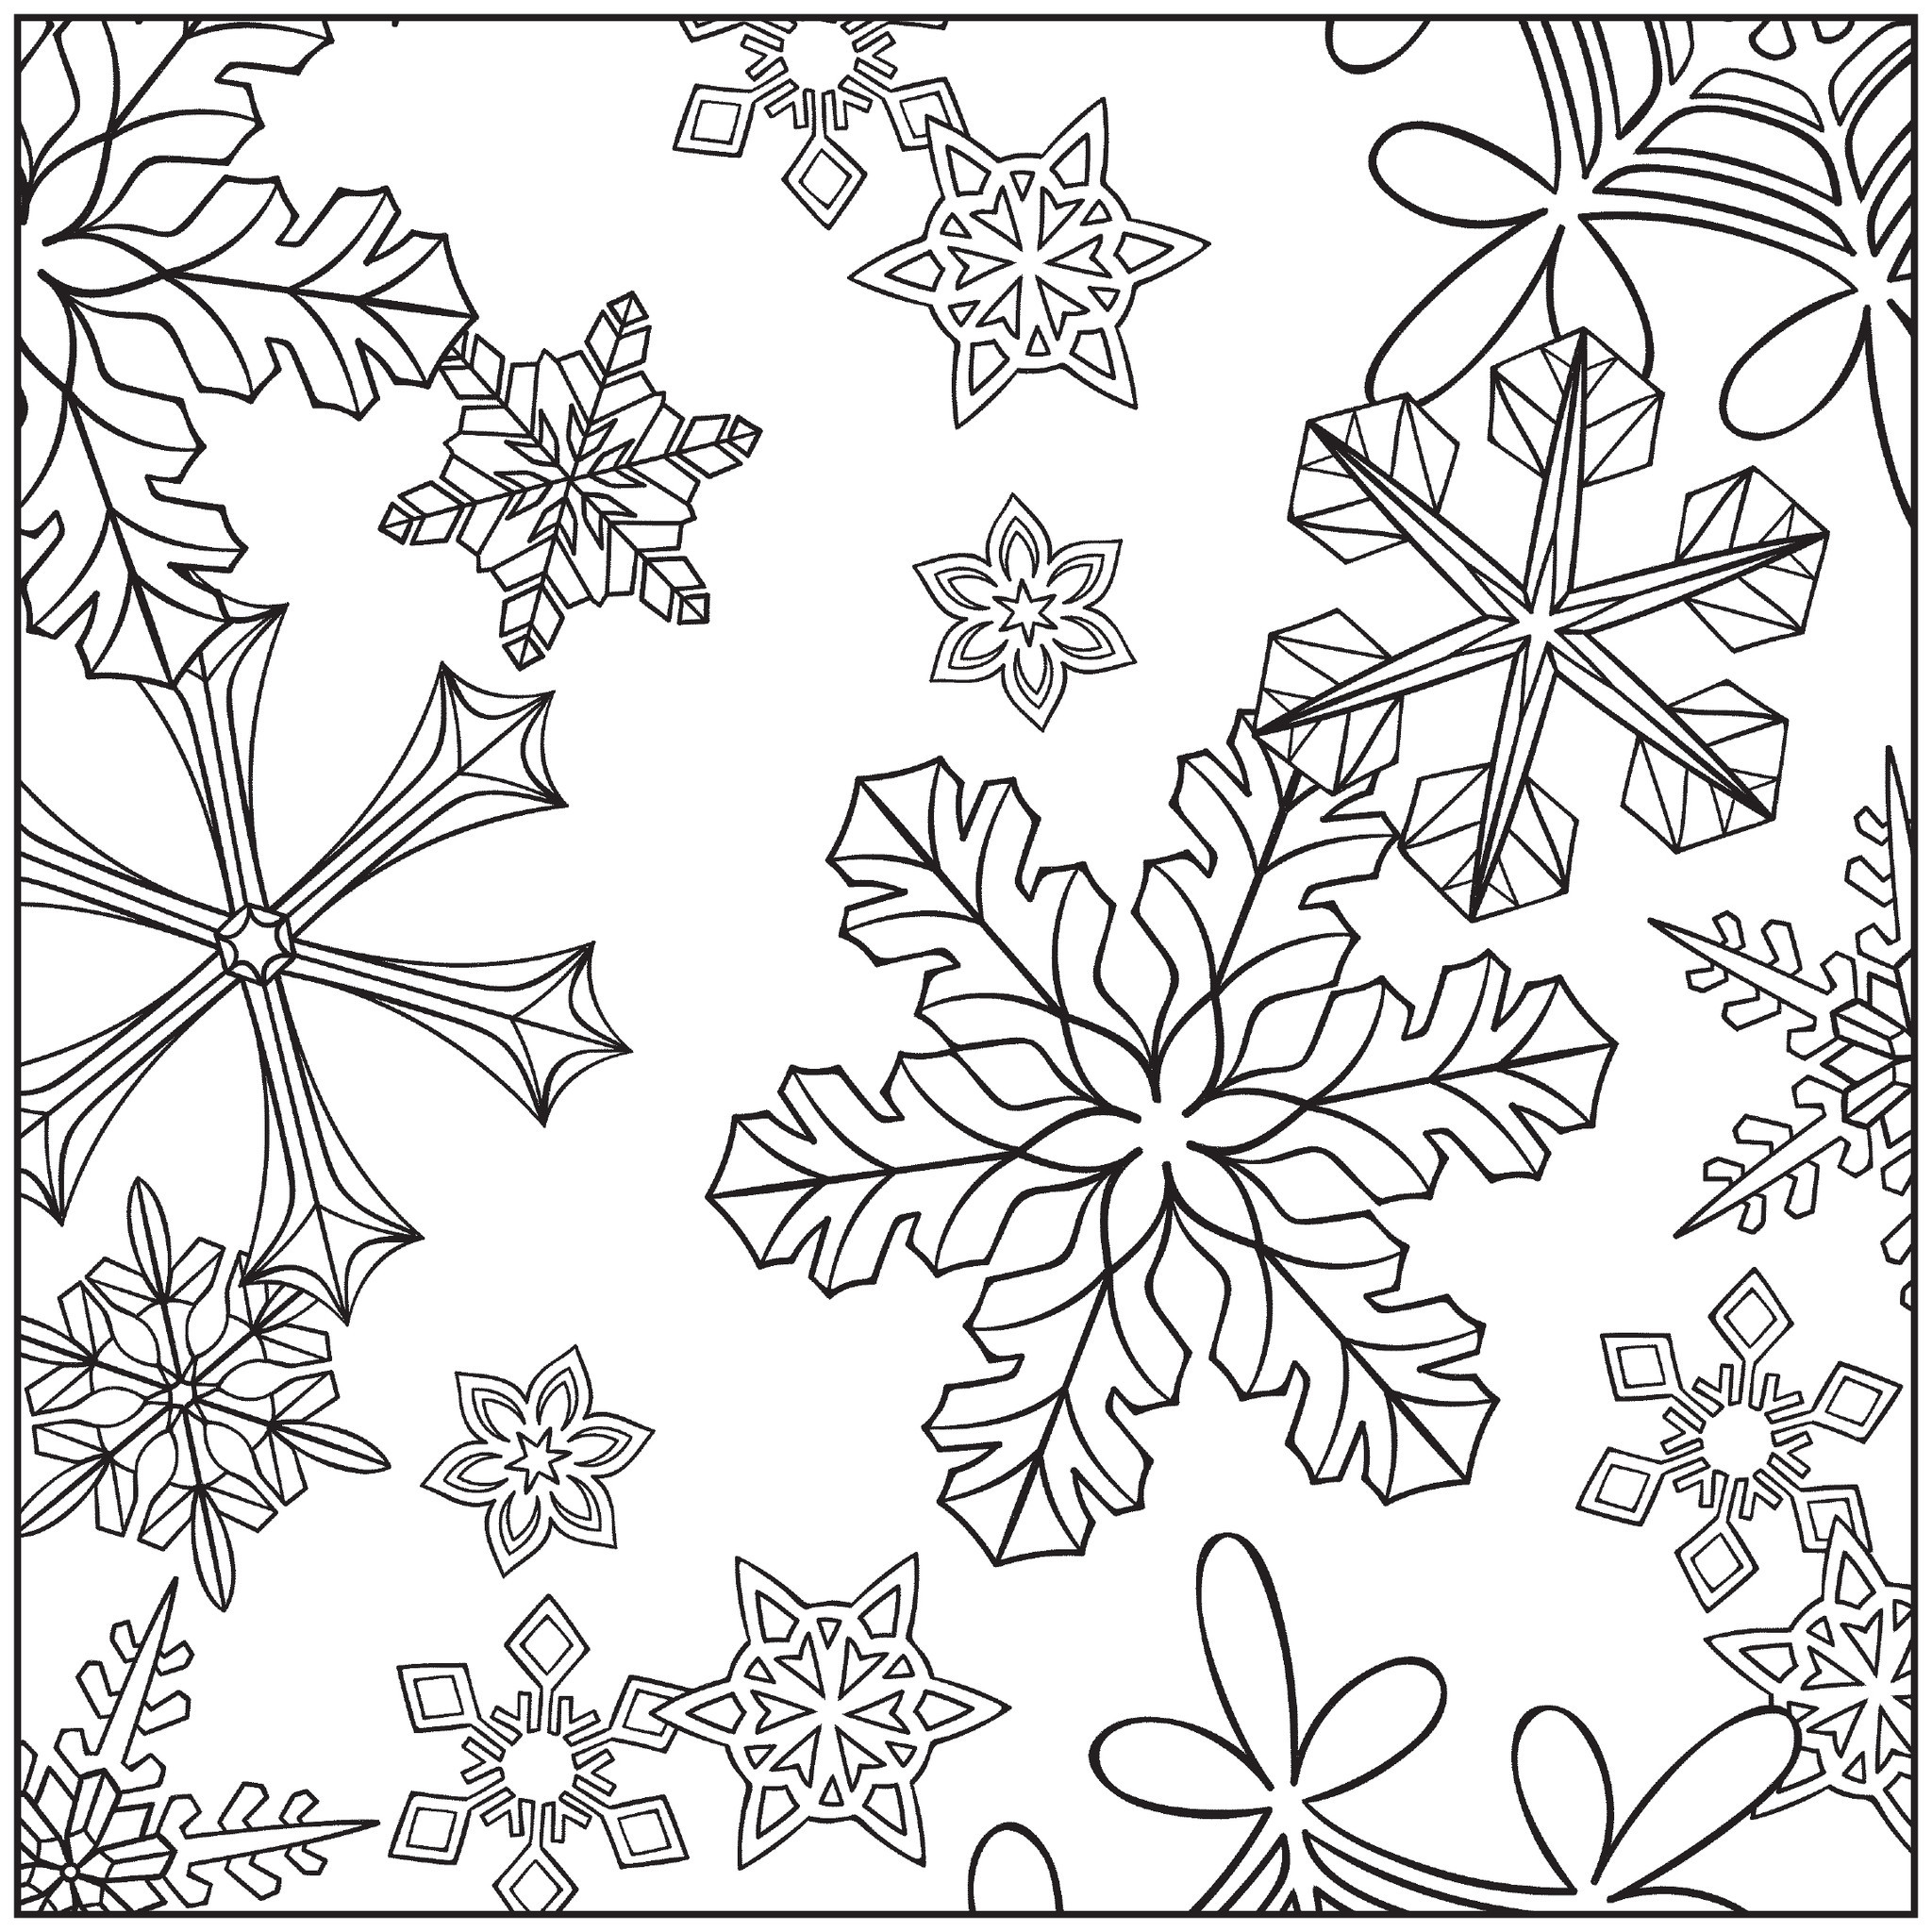 Winter Coloring Pages Adults
 Winter Coloring Pages Adults